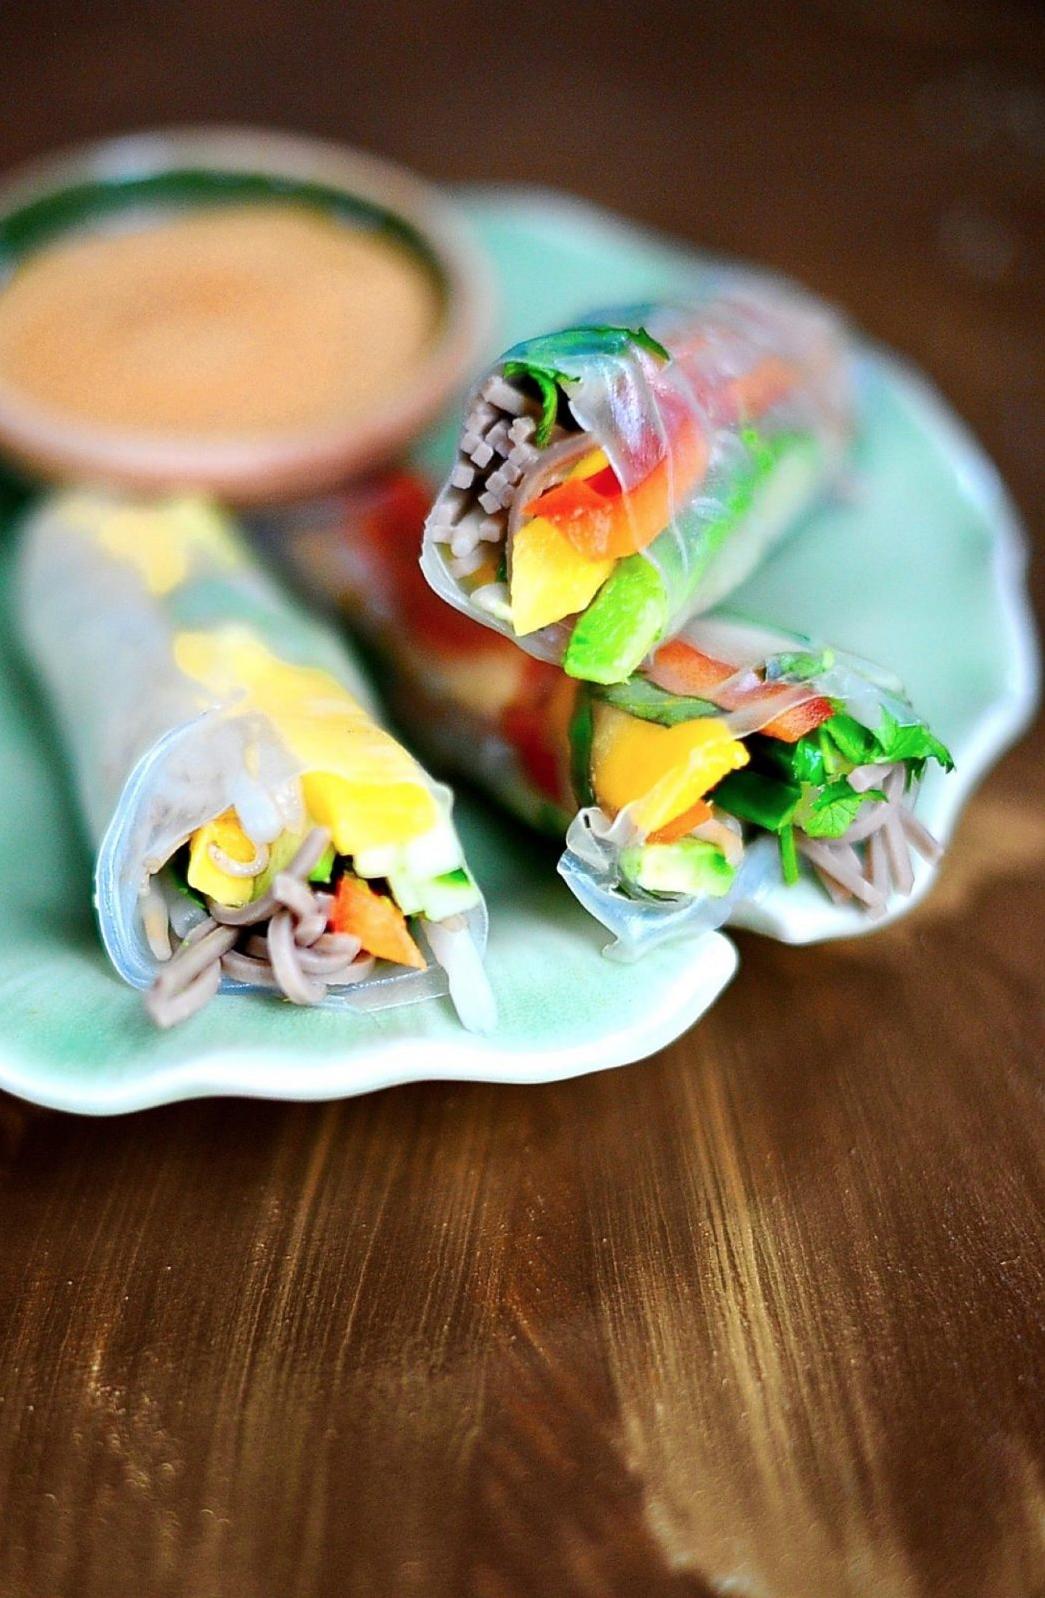  Looking for an appetizer that's sure to impress? Try these Vietnamese Shrimp Rolls.